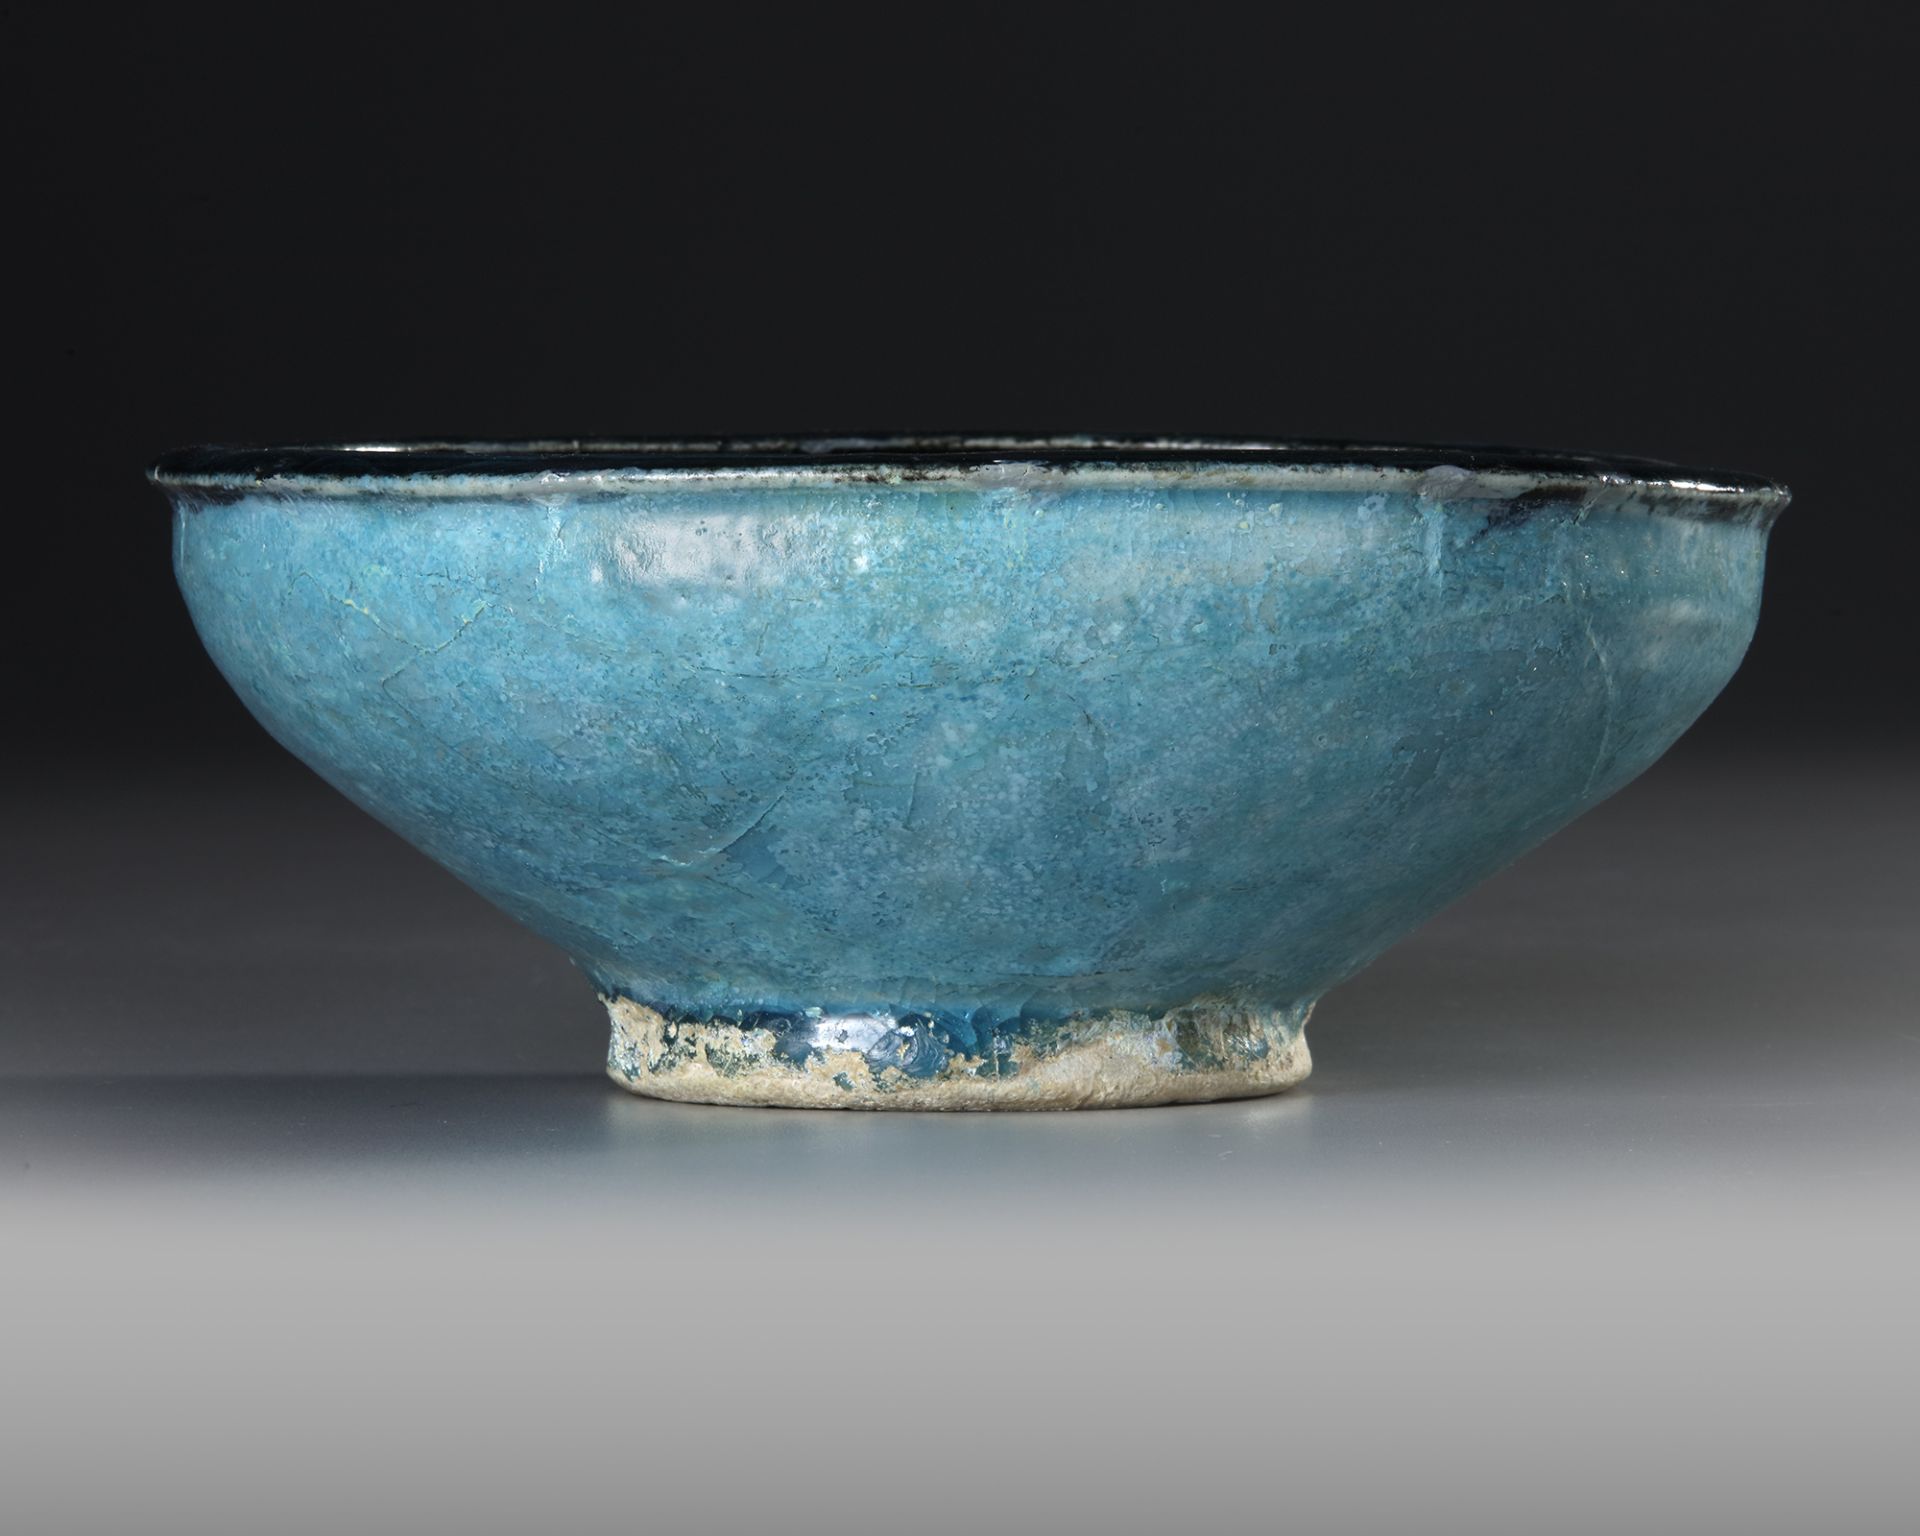 A BLACK AND TURQUOISE GLAZED KASHAN BOWL, PERSIA, 13TH CENTURY - Image 4 of 8